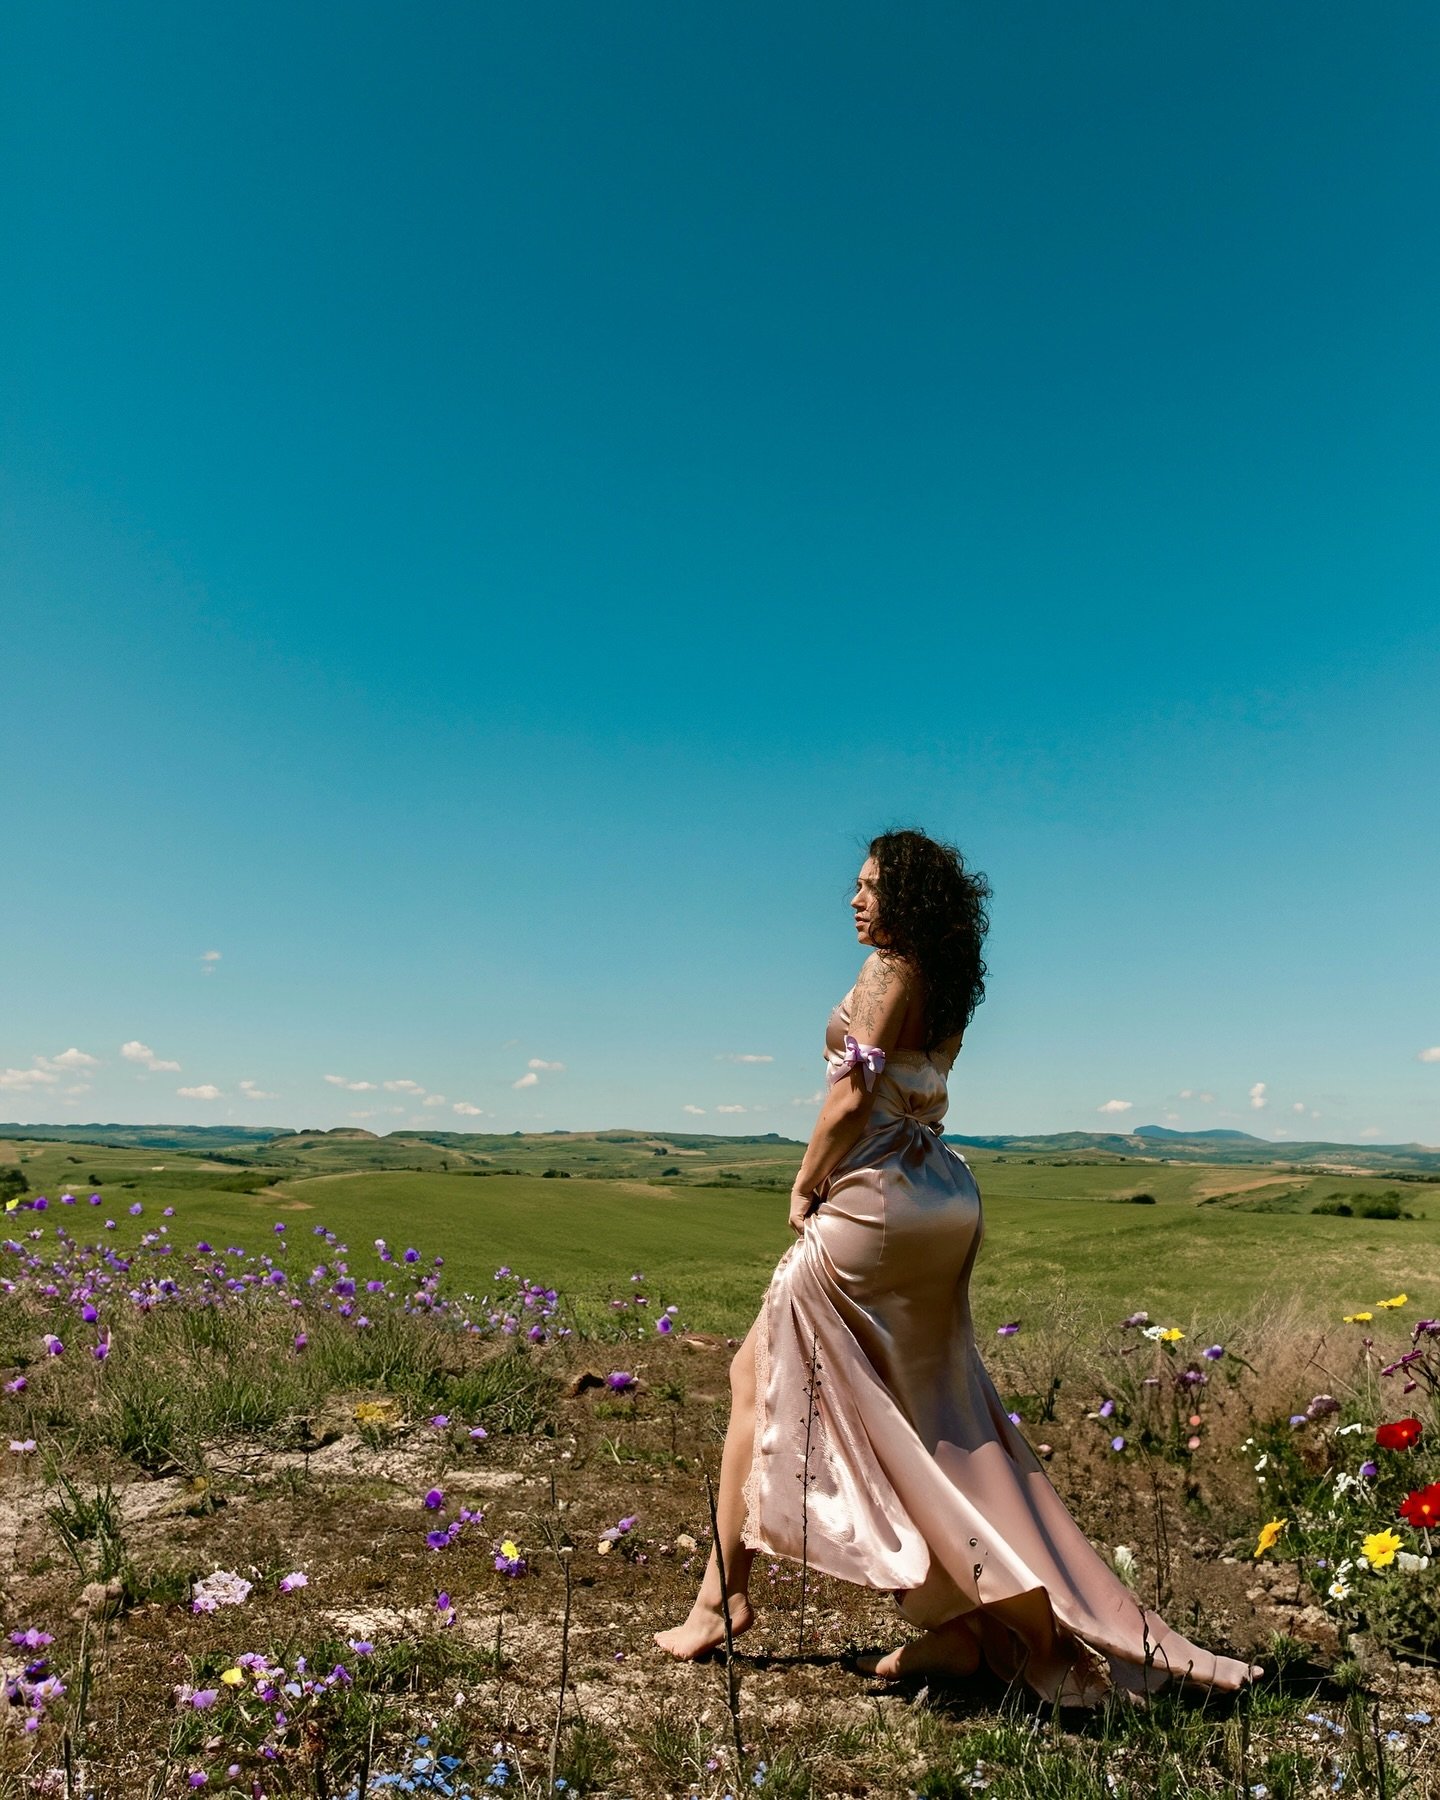 🌷☀️⬇️ are you a&hellip;

Sometimes you just gotta grab a dress and hit the spring fields that are just starting to bloom. ⬇️ 

Did you know June, July and August capture very differently in camera? 

Do you know what one you prefer for your session?